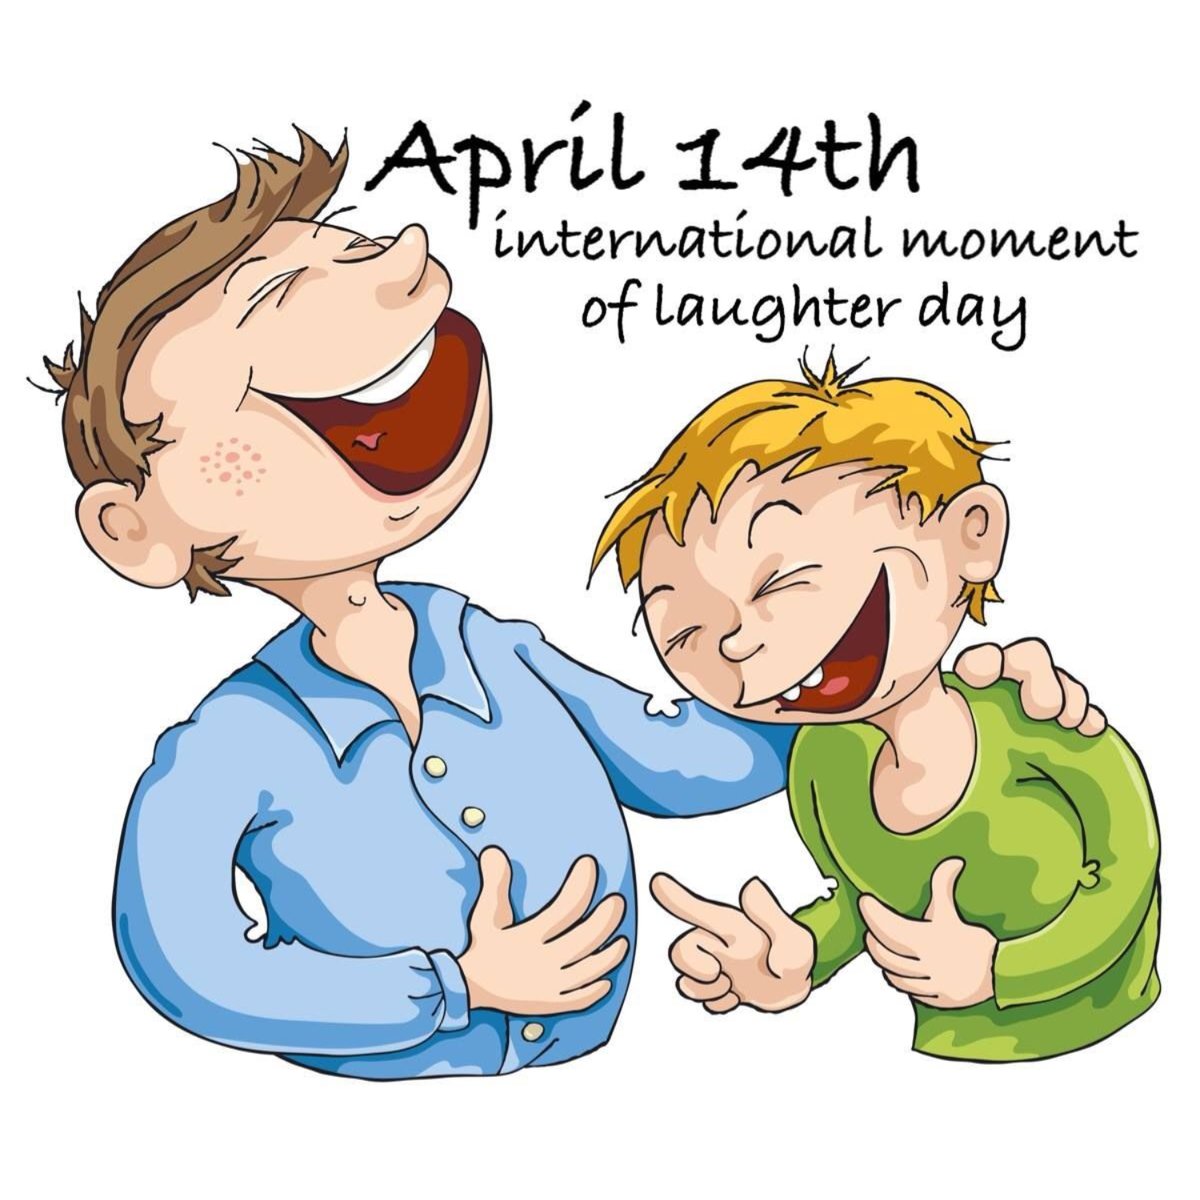 World Laughter Day 😆 celebrated to raise awareness about laughter's healing benefits.

Celebrated since 1998, World Laughter Day is an annual event celebrated to raise awareness about laughter and its many healing benefits. 

#laugh #laughter #worldlaughterday